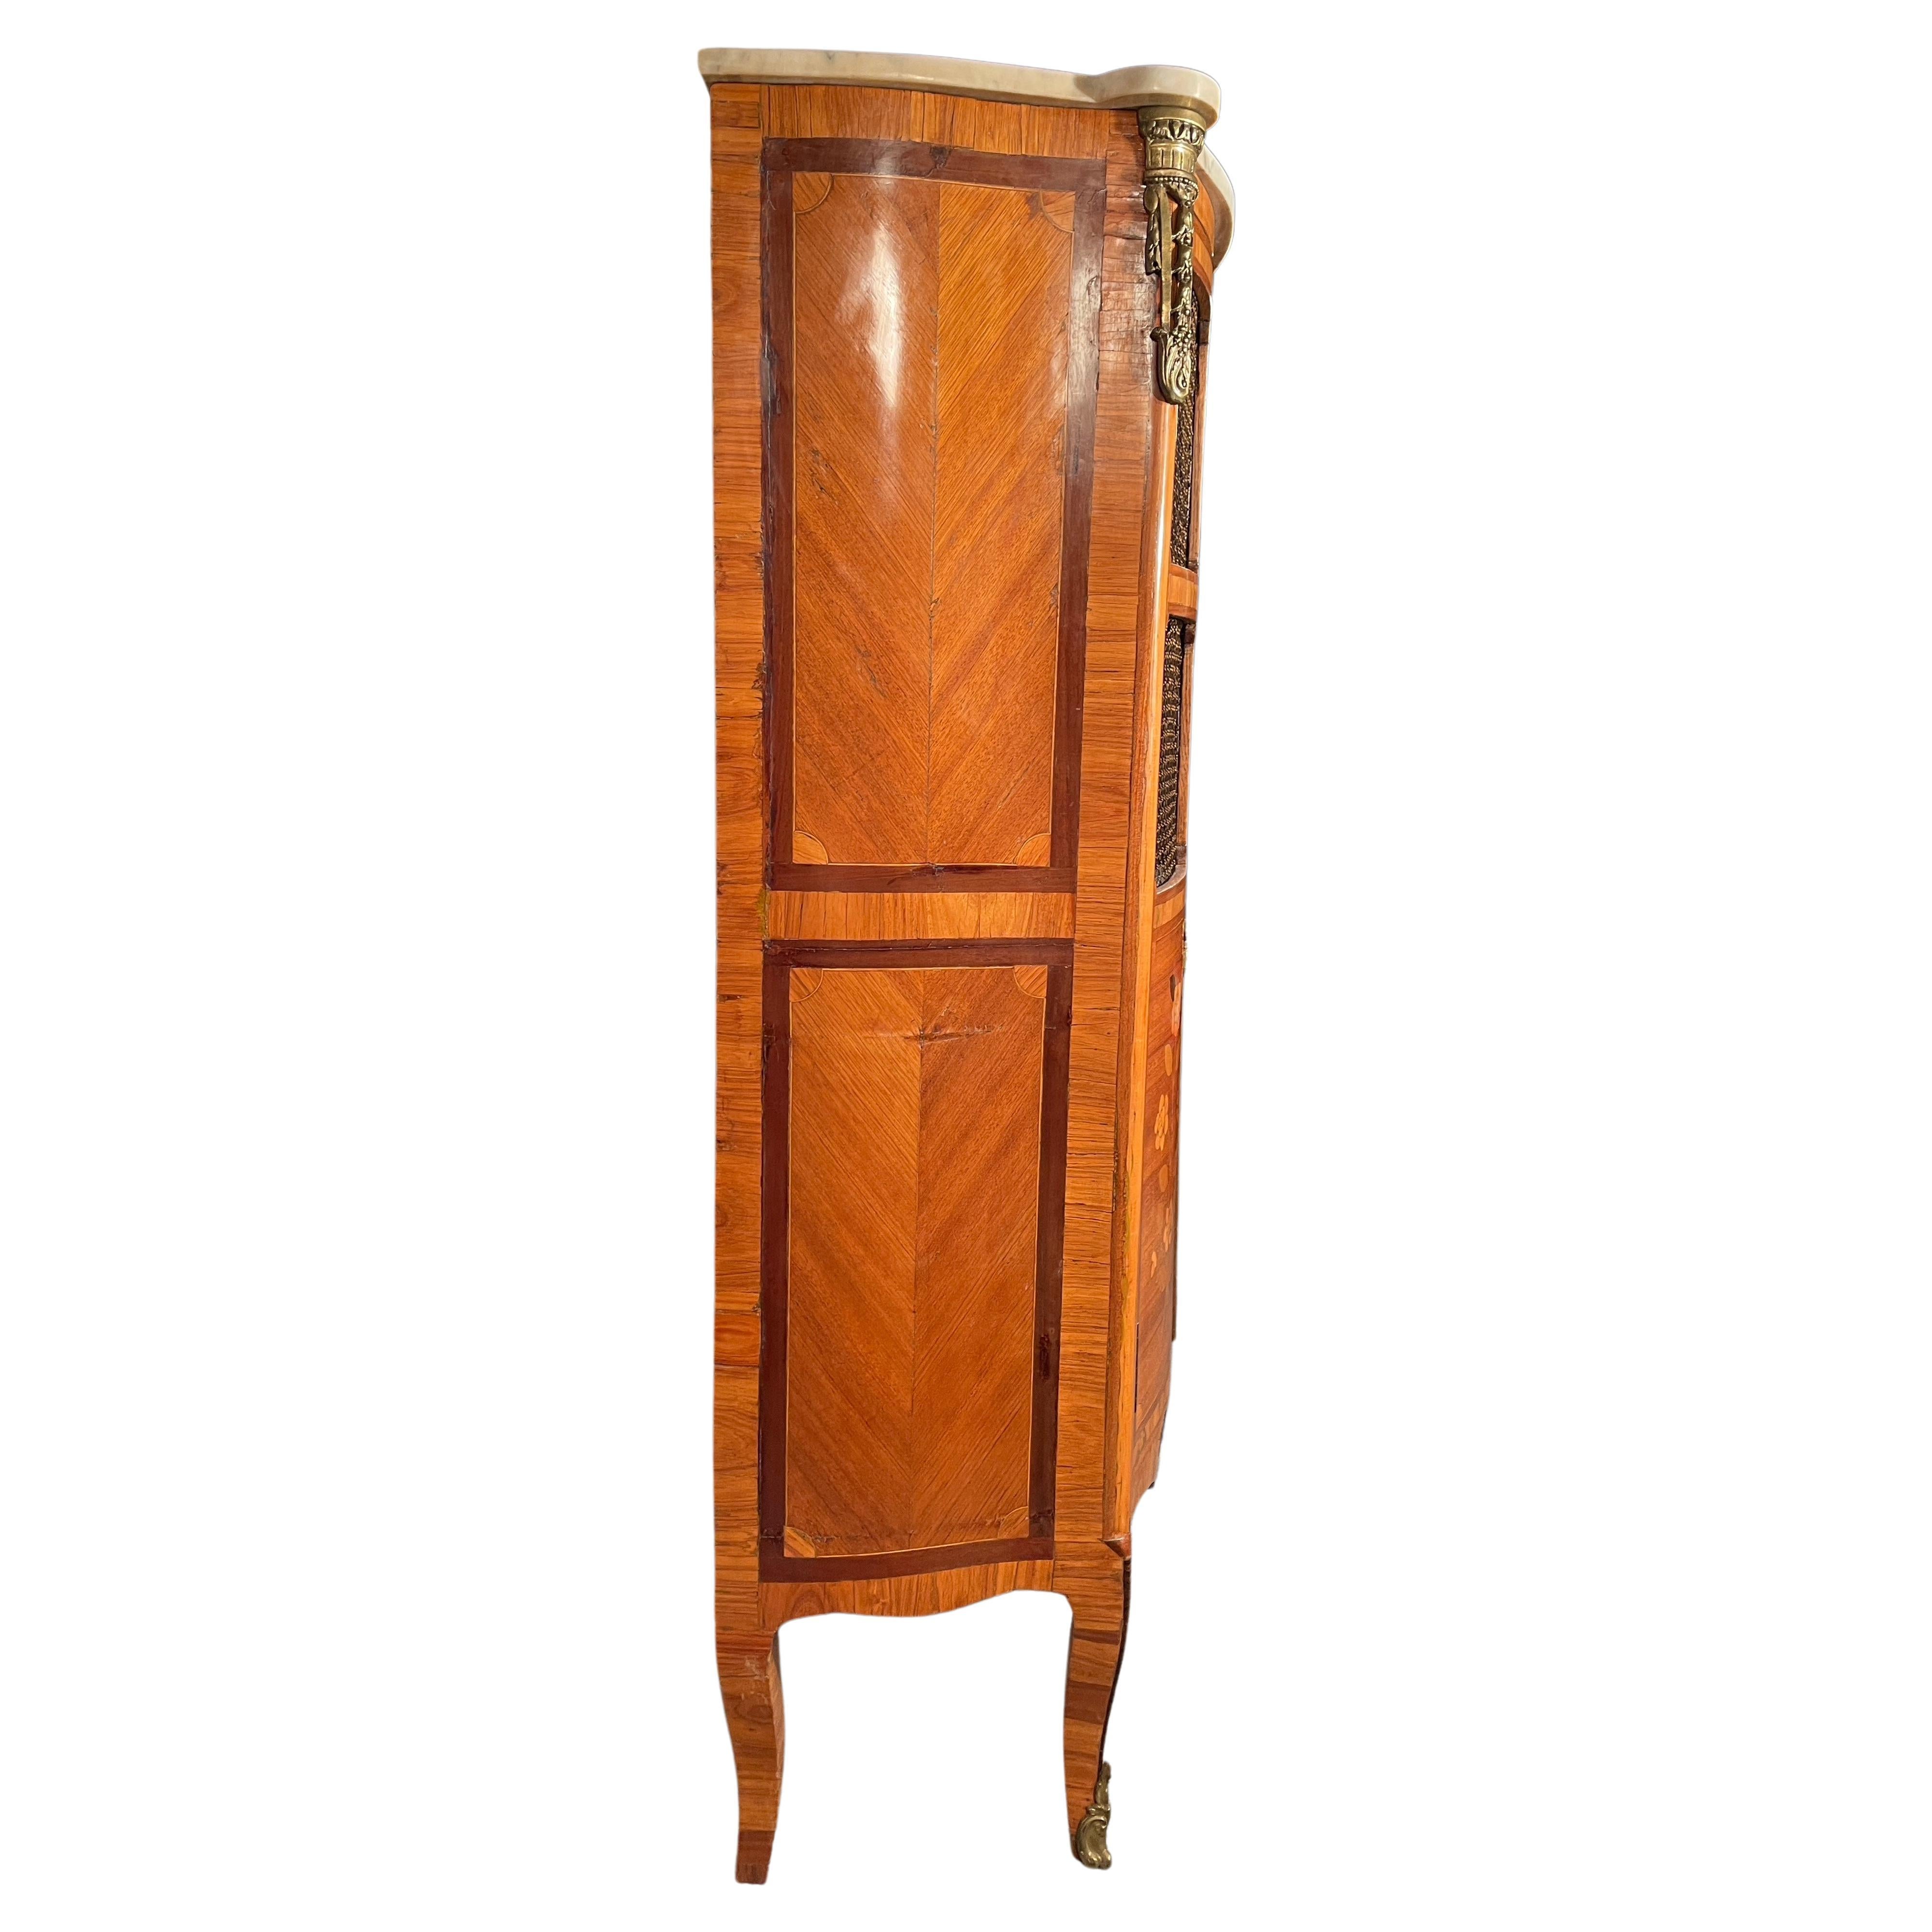 Step back in time with this captivating Napoleon III Bookcase from France, dating back to the 1850-60's. Its charming design features a slightly curved front with two doors, boasting beautifully executed flower marquetry on the lower part and an